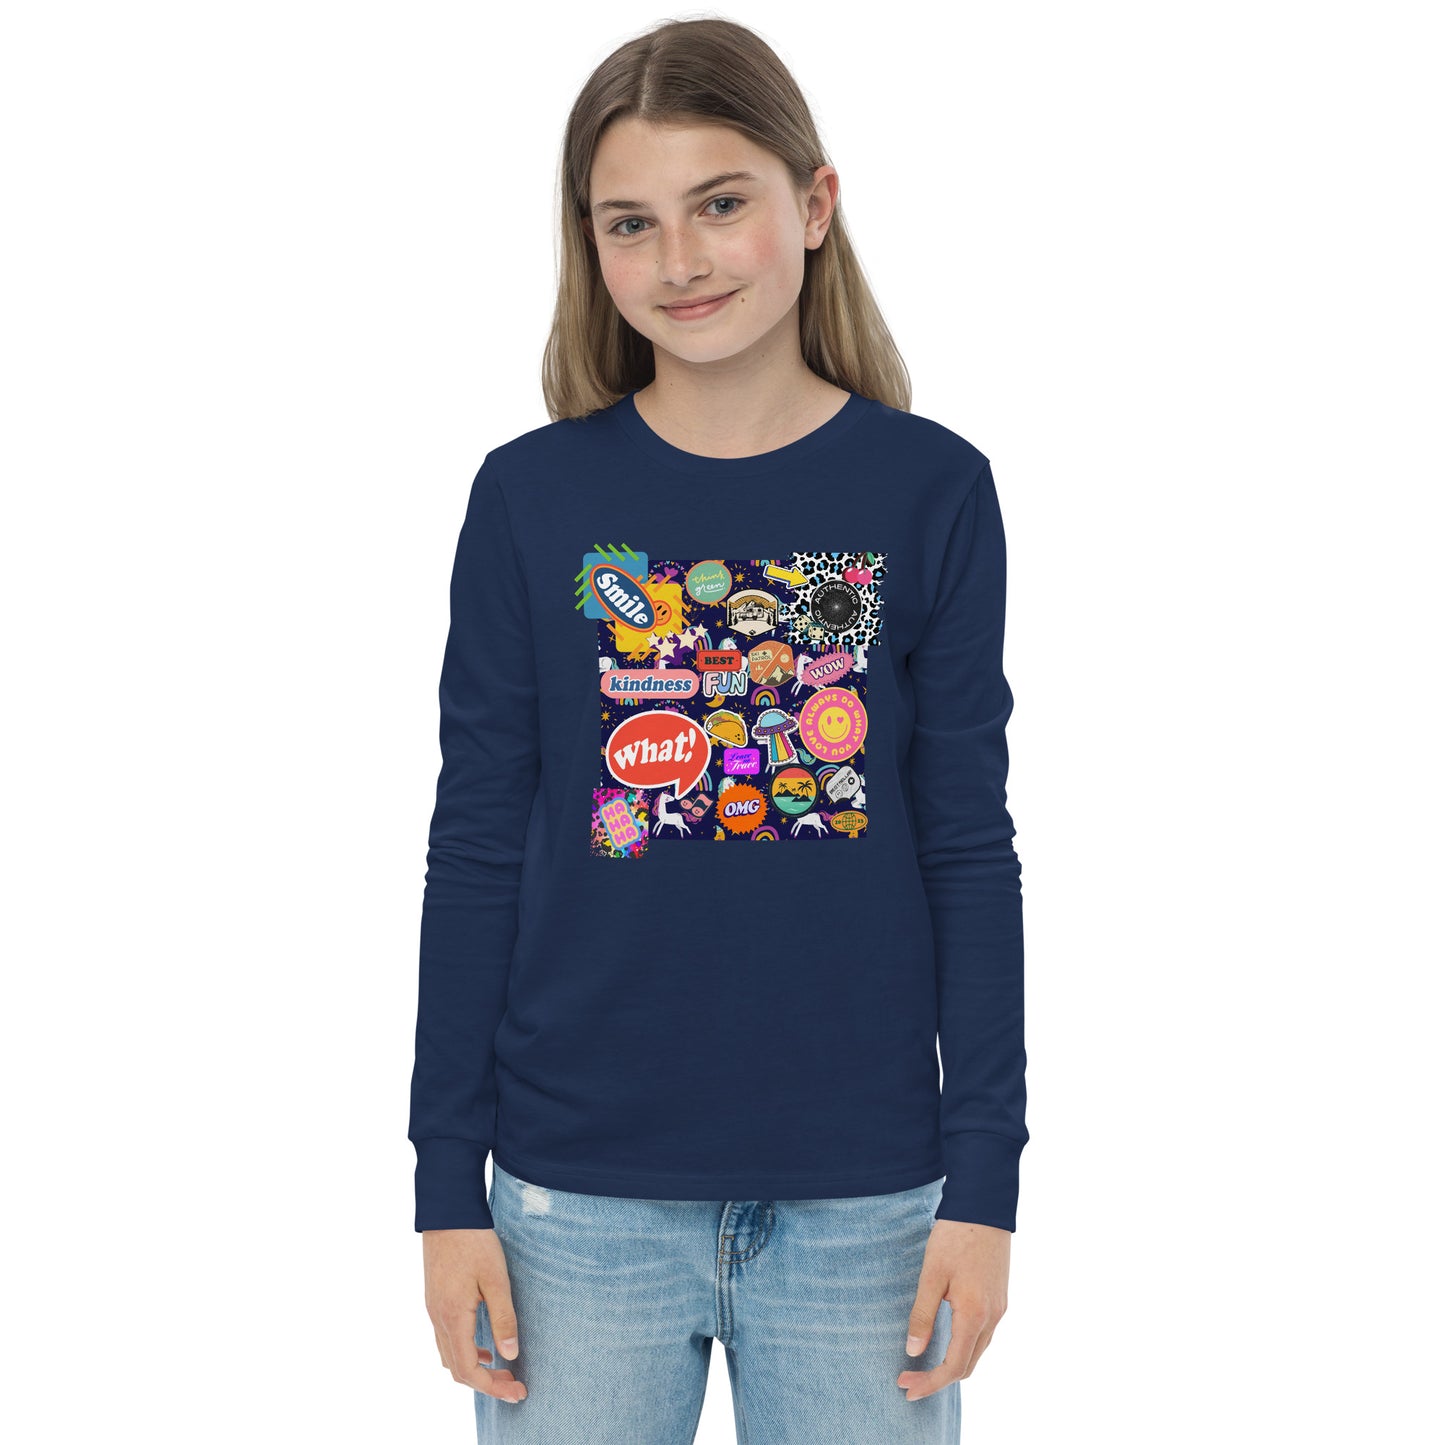 Patches to make you Smile Long Sleeve Tee Shirt